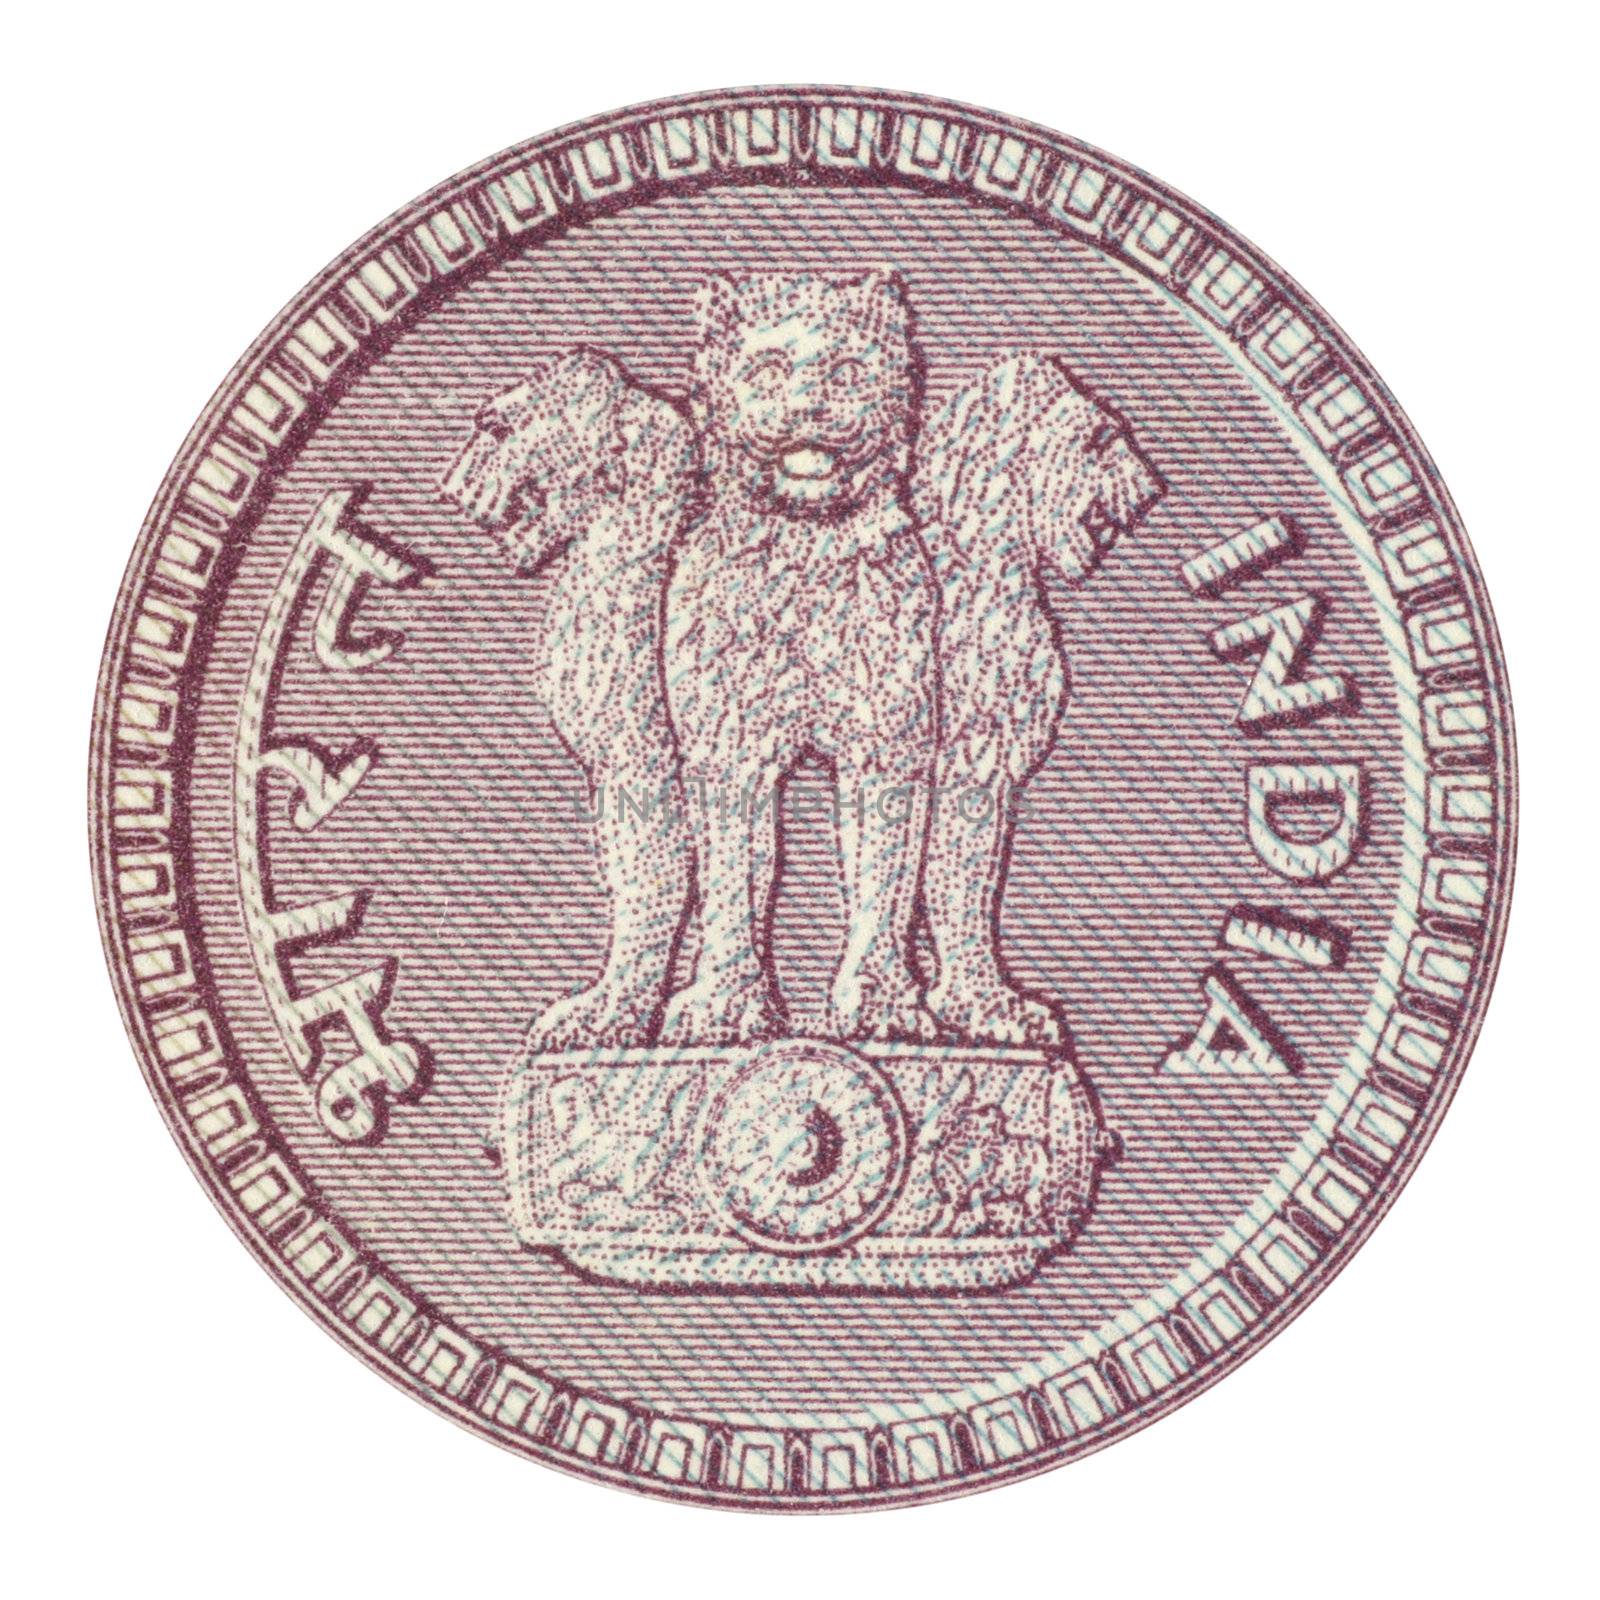 Emblem of India from 1 rupee 1963 isolated in white